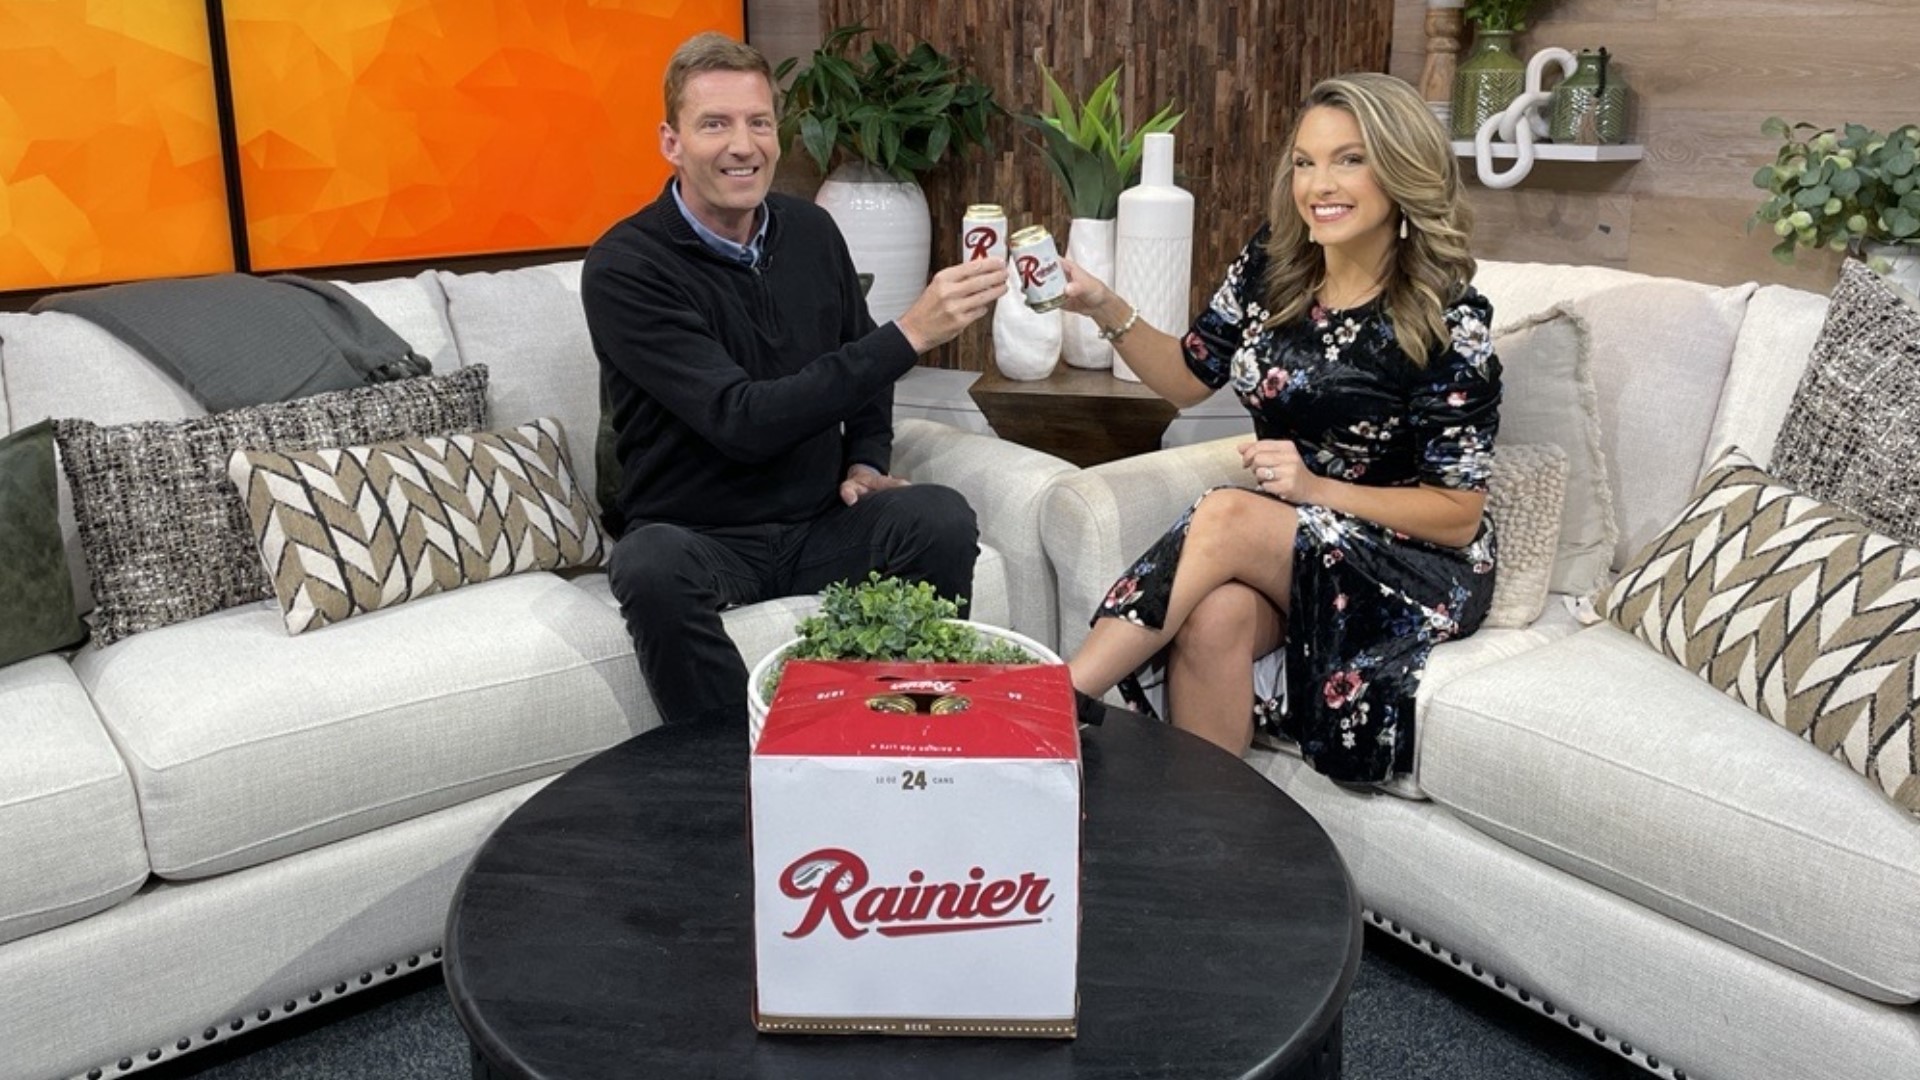 Evening’s Saint Bryan and Amity popped a beer while talking about Rainier Beer’s history and the iconic ads being used in upcoming documentary. #newdaynw